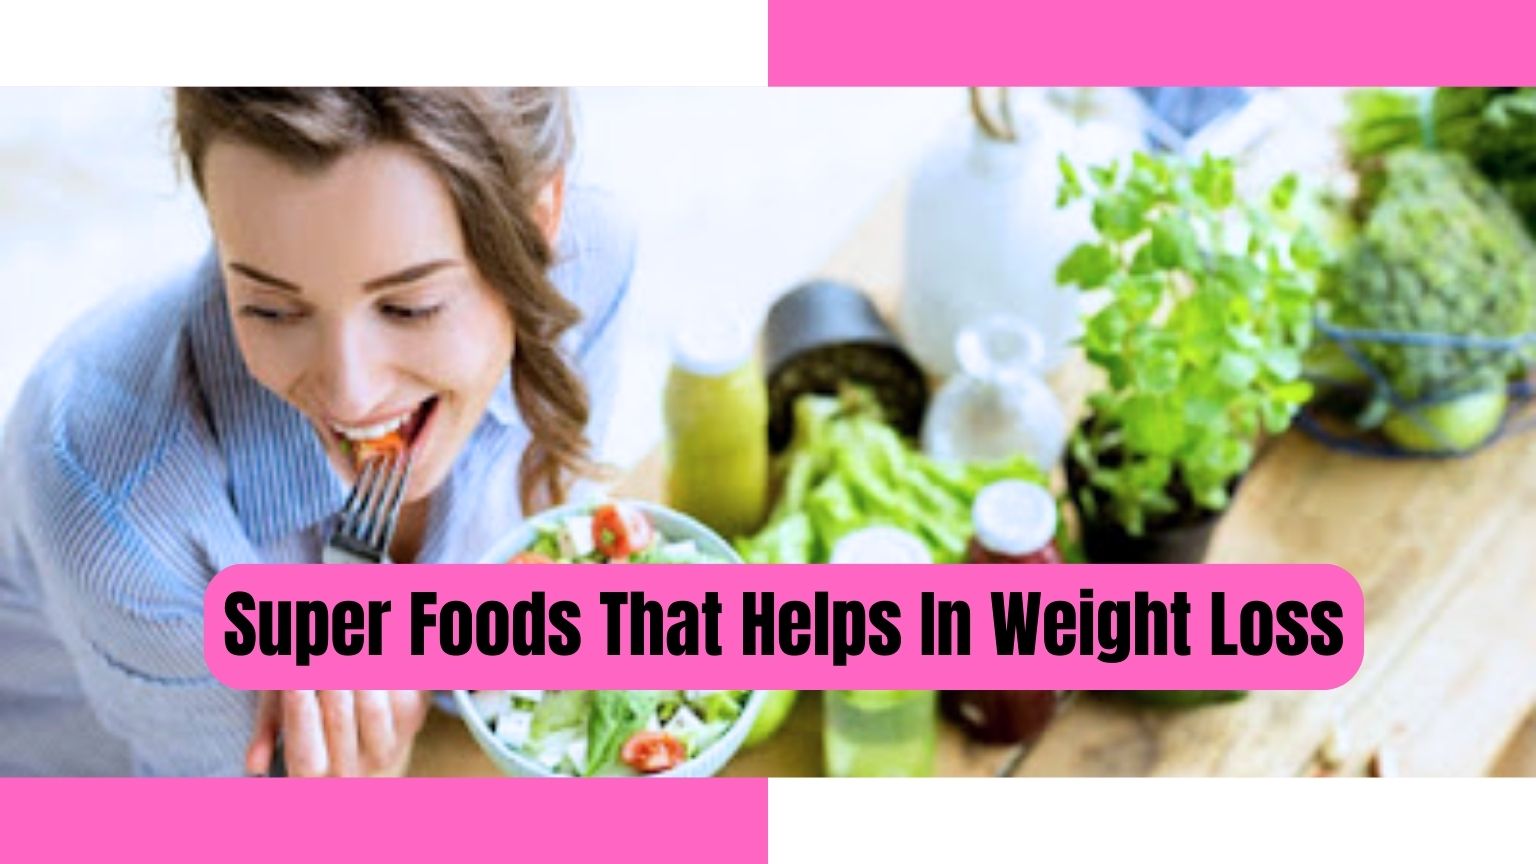 Top 10 Super Foods That Helps In Weight Loss